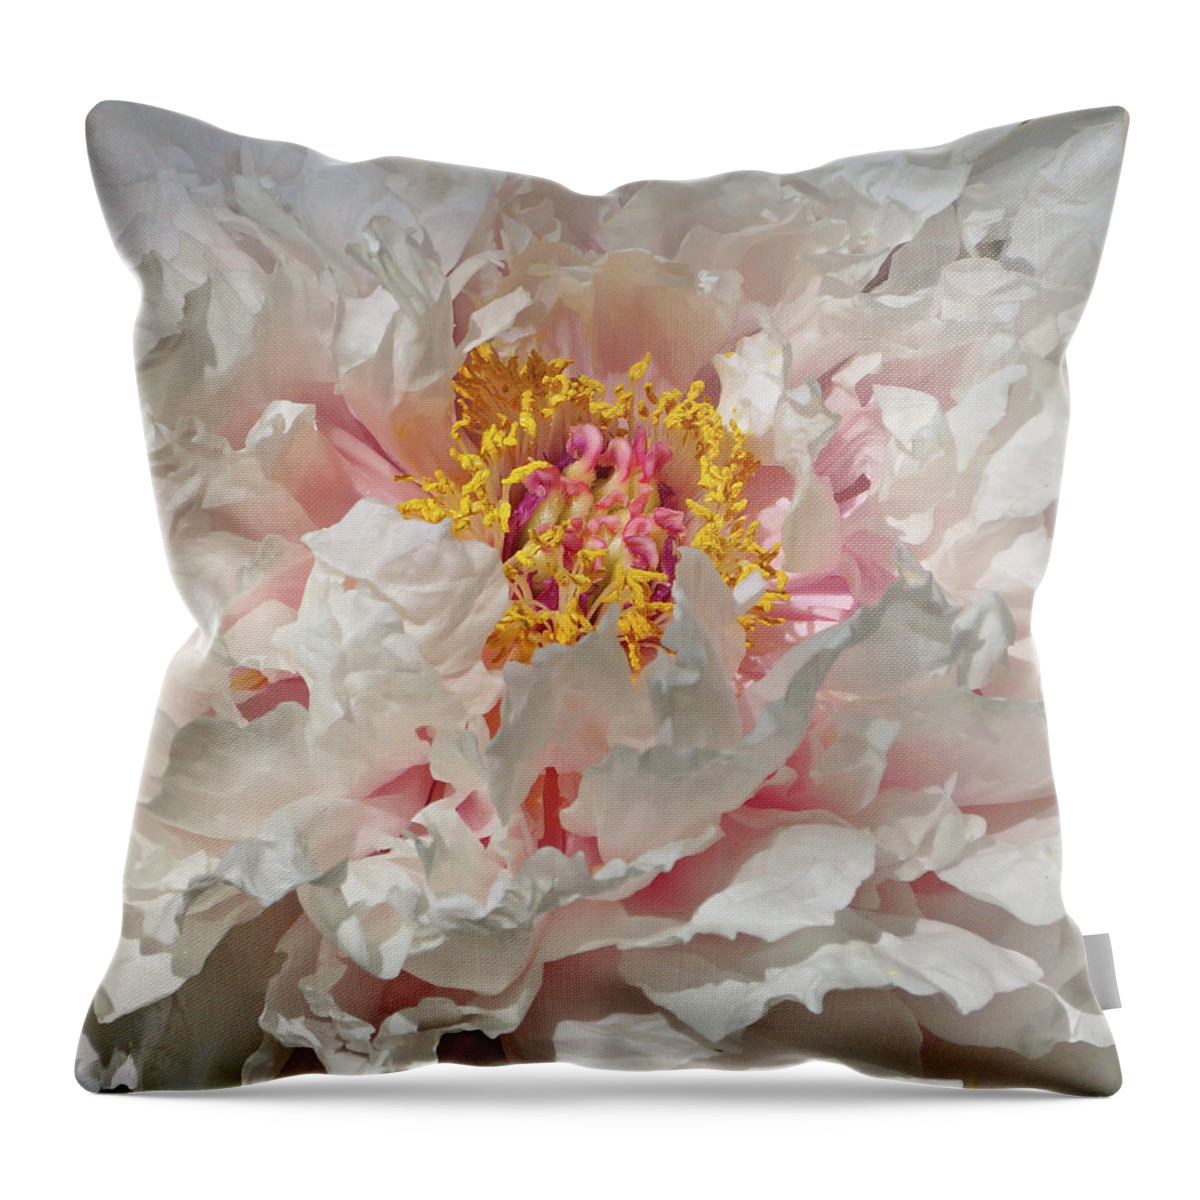 White Peony Throw Pillow featuring the photograph White Peony by Sandy Keeton